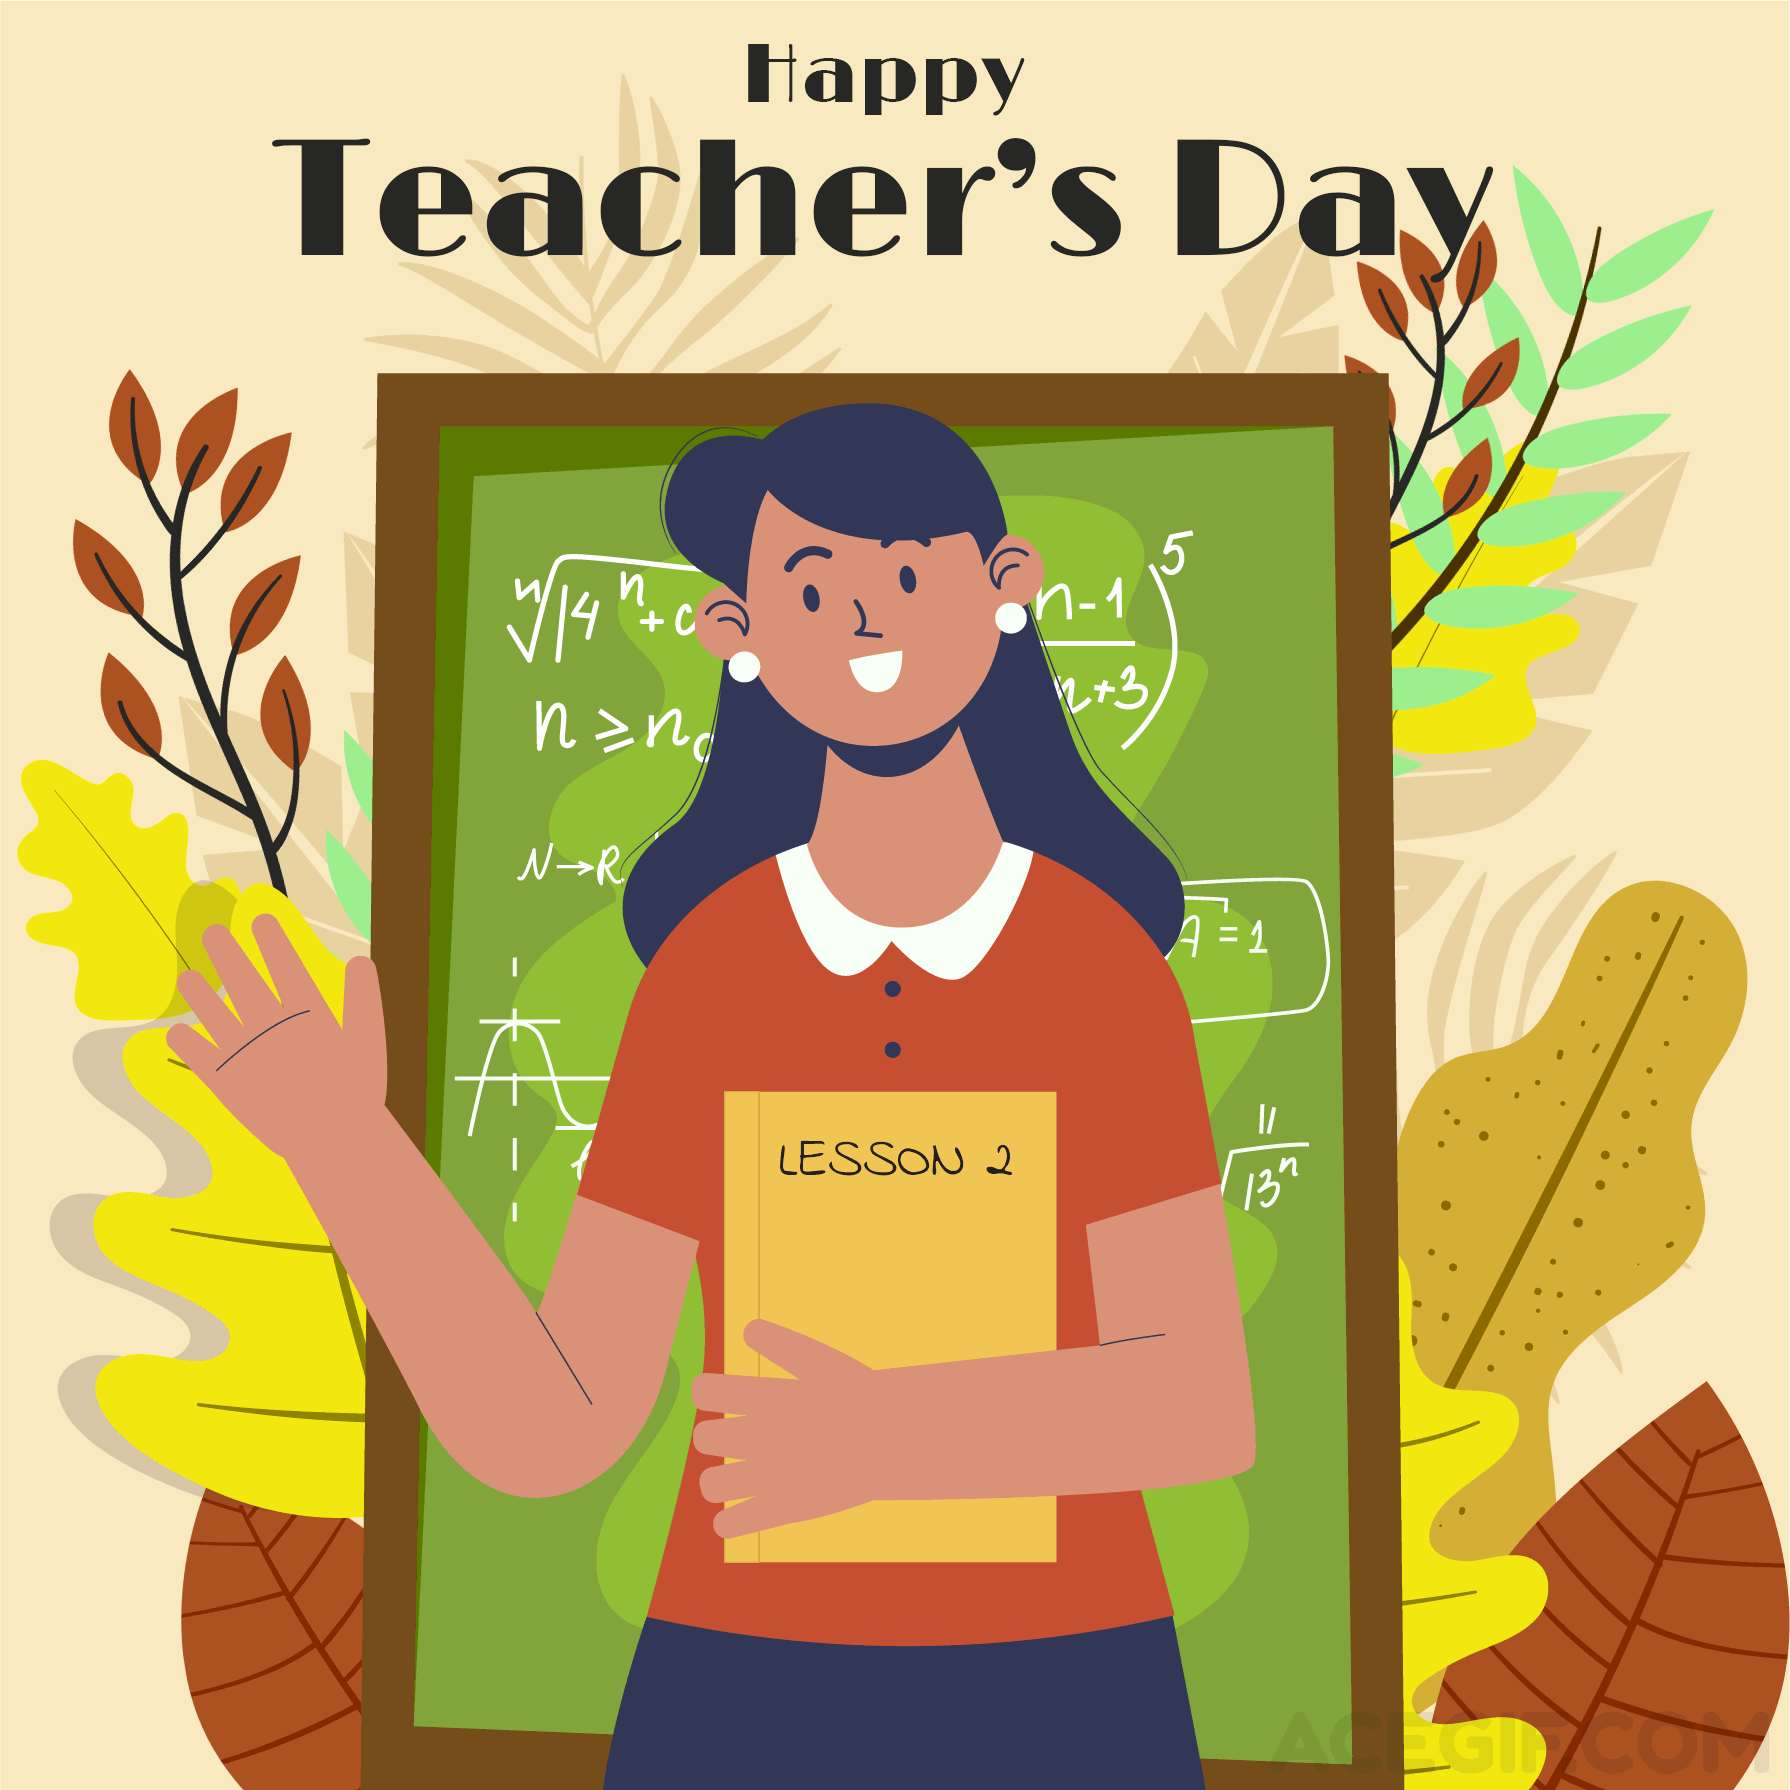 Happy Teacher's Day GIFs Moving Pictures With Best Wishes